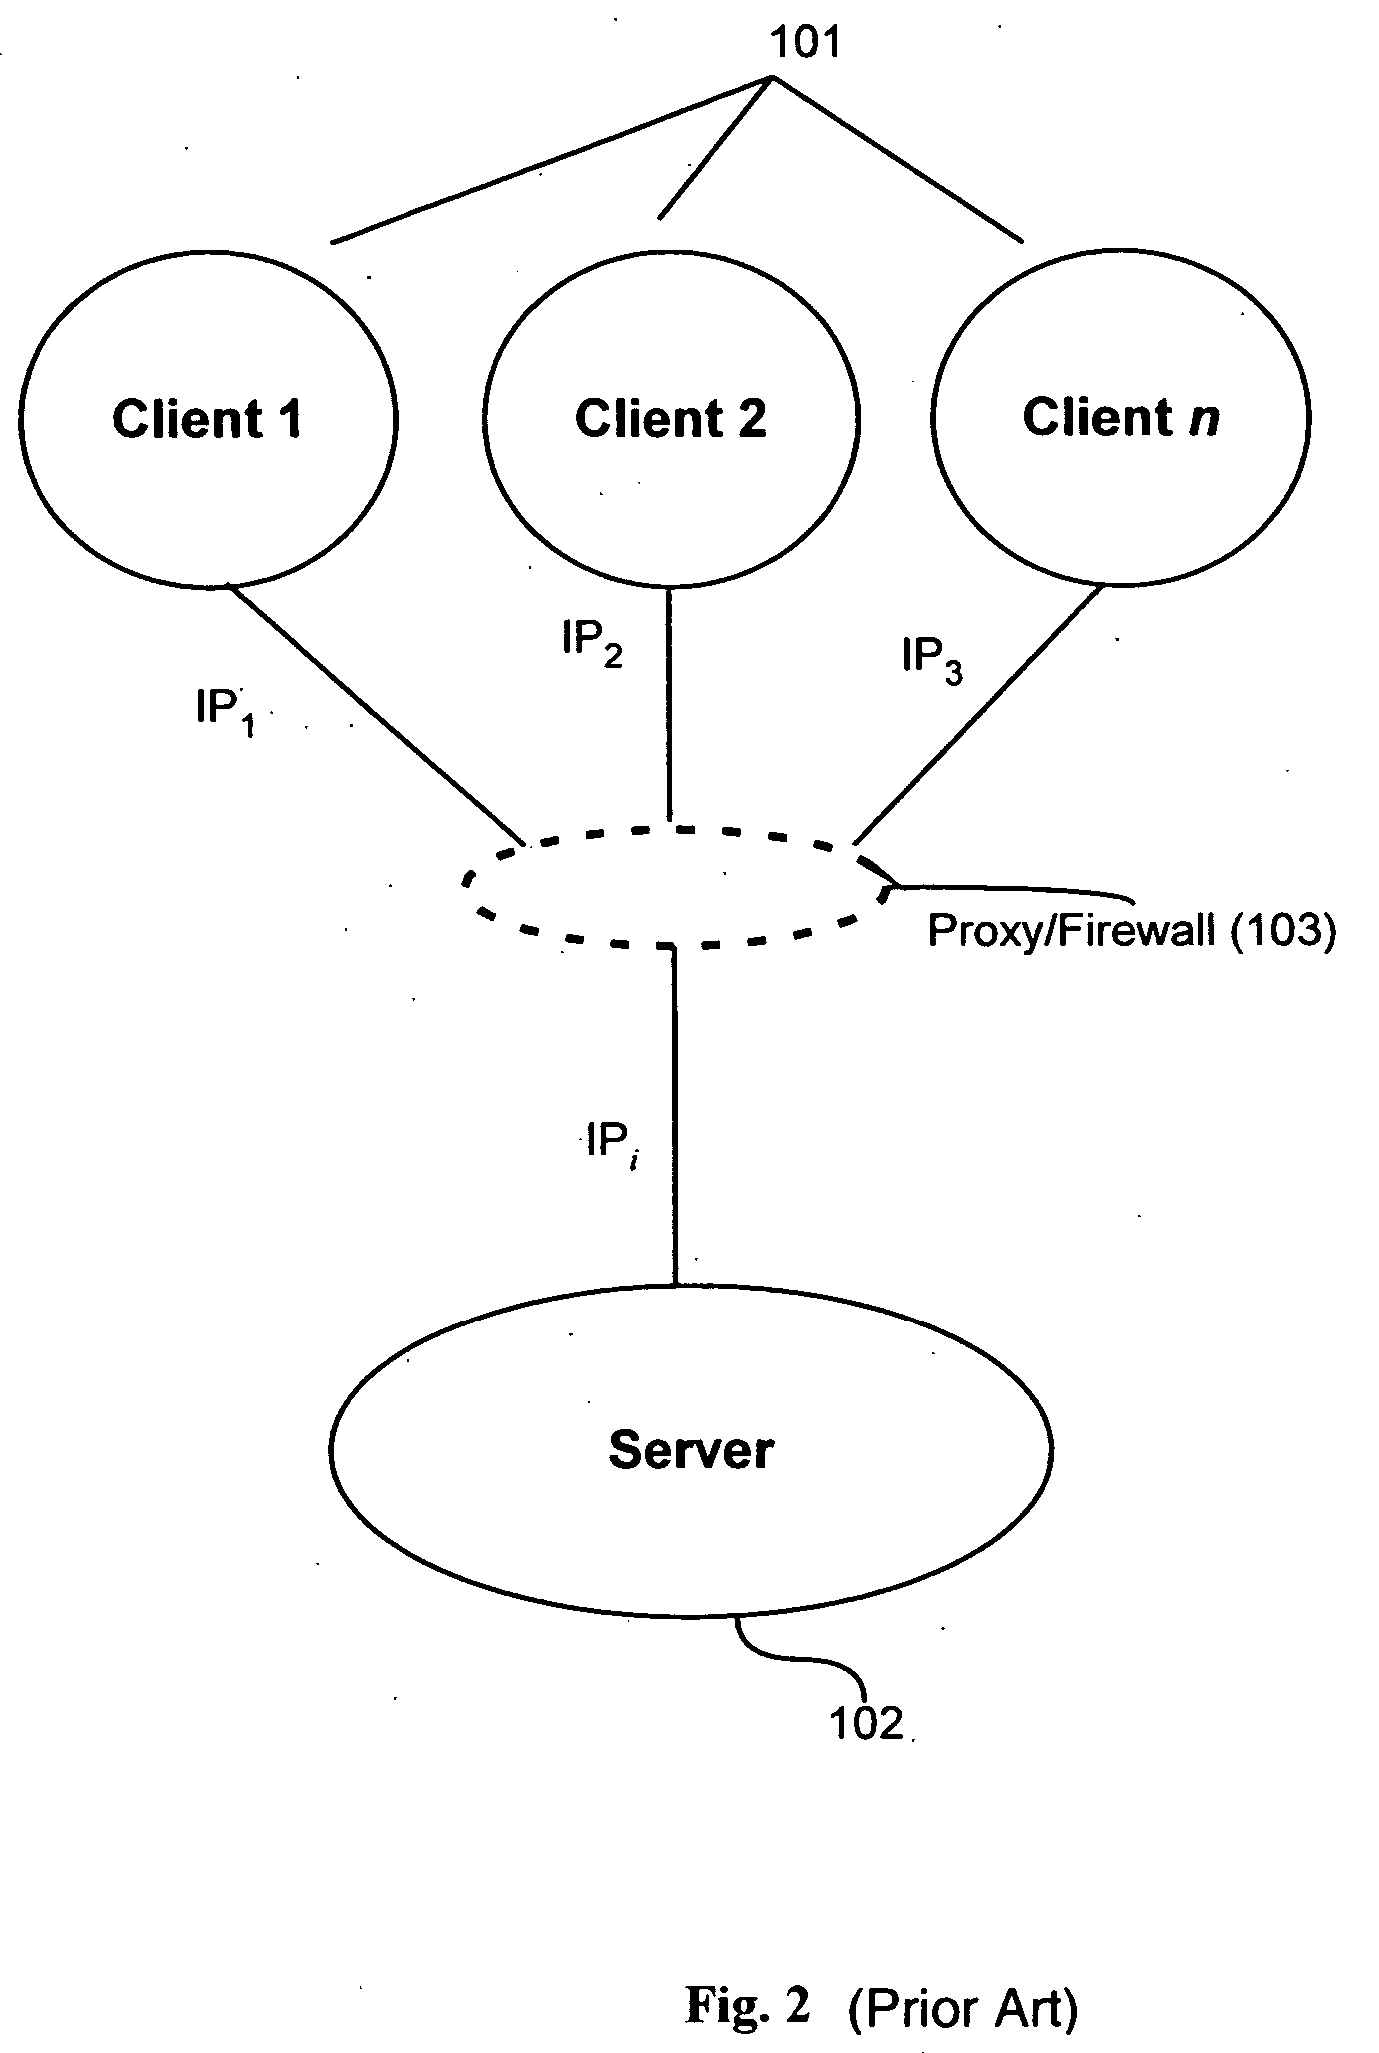 Method and apparatus for trust-based, fine-grained rate limiting of network requests